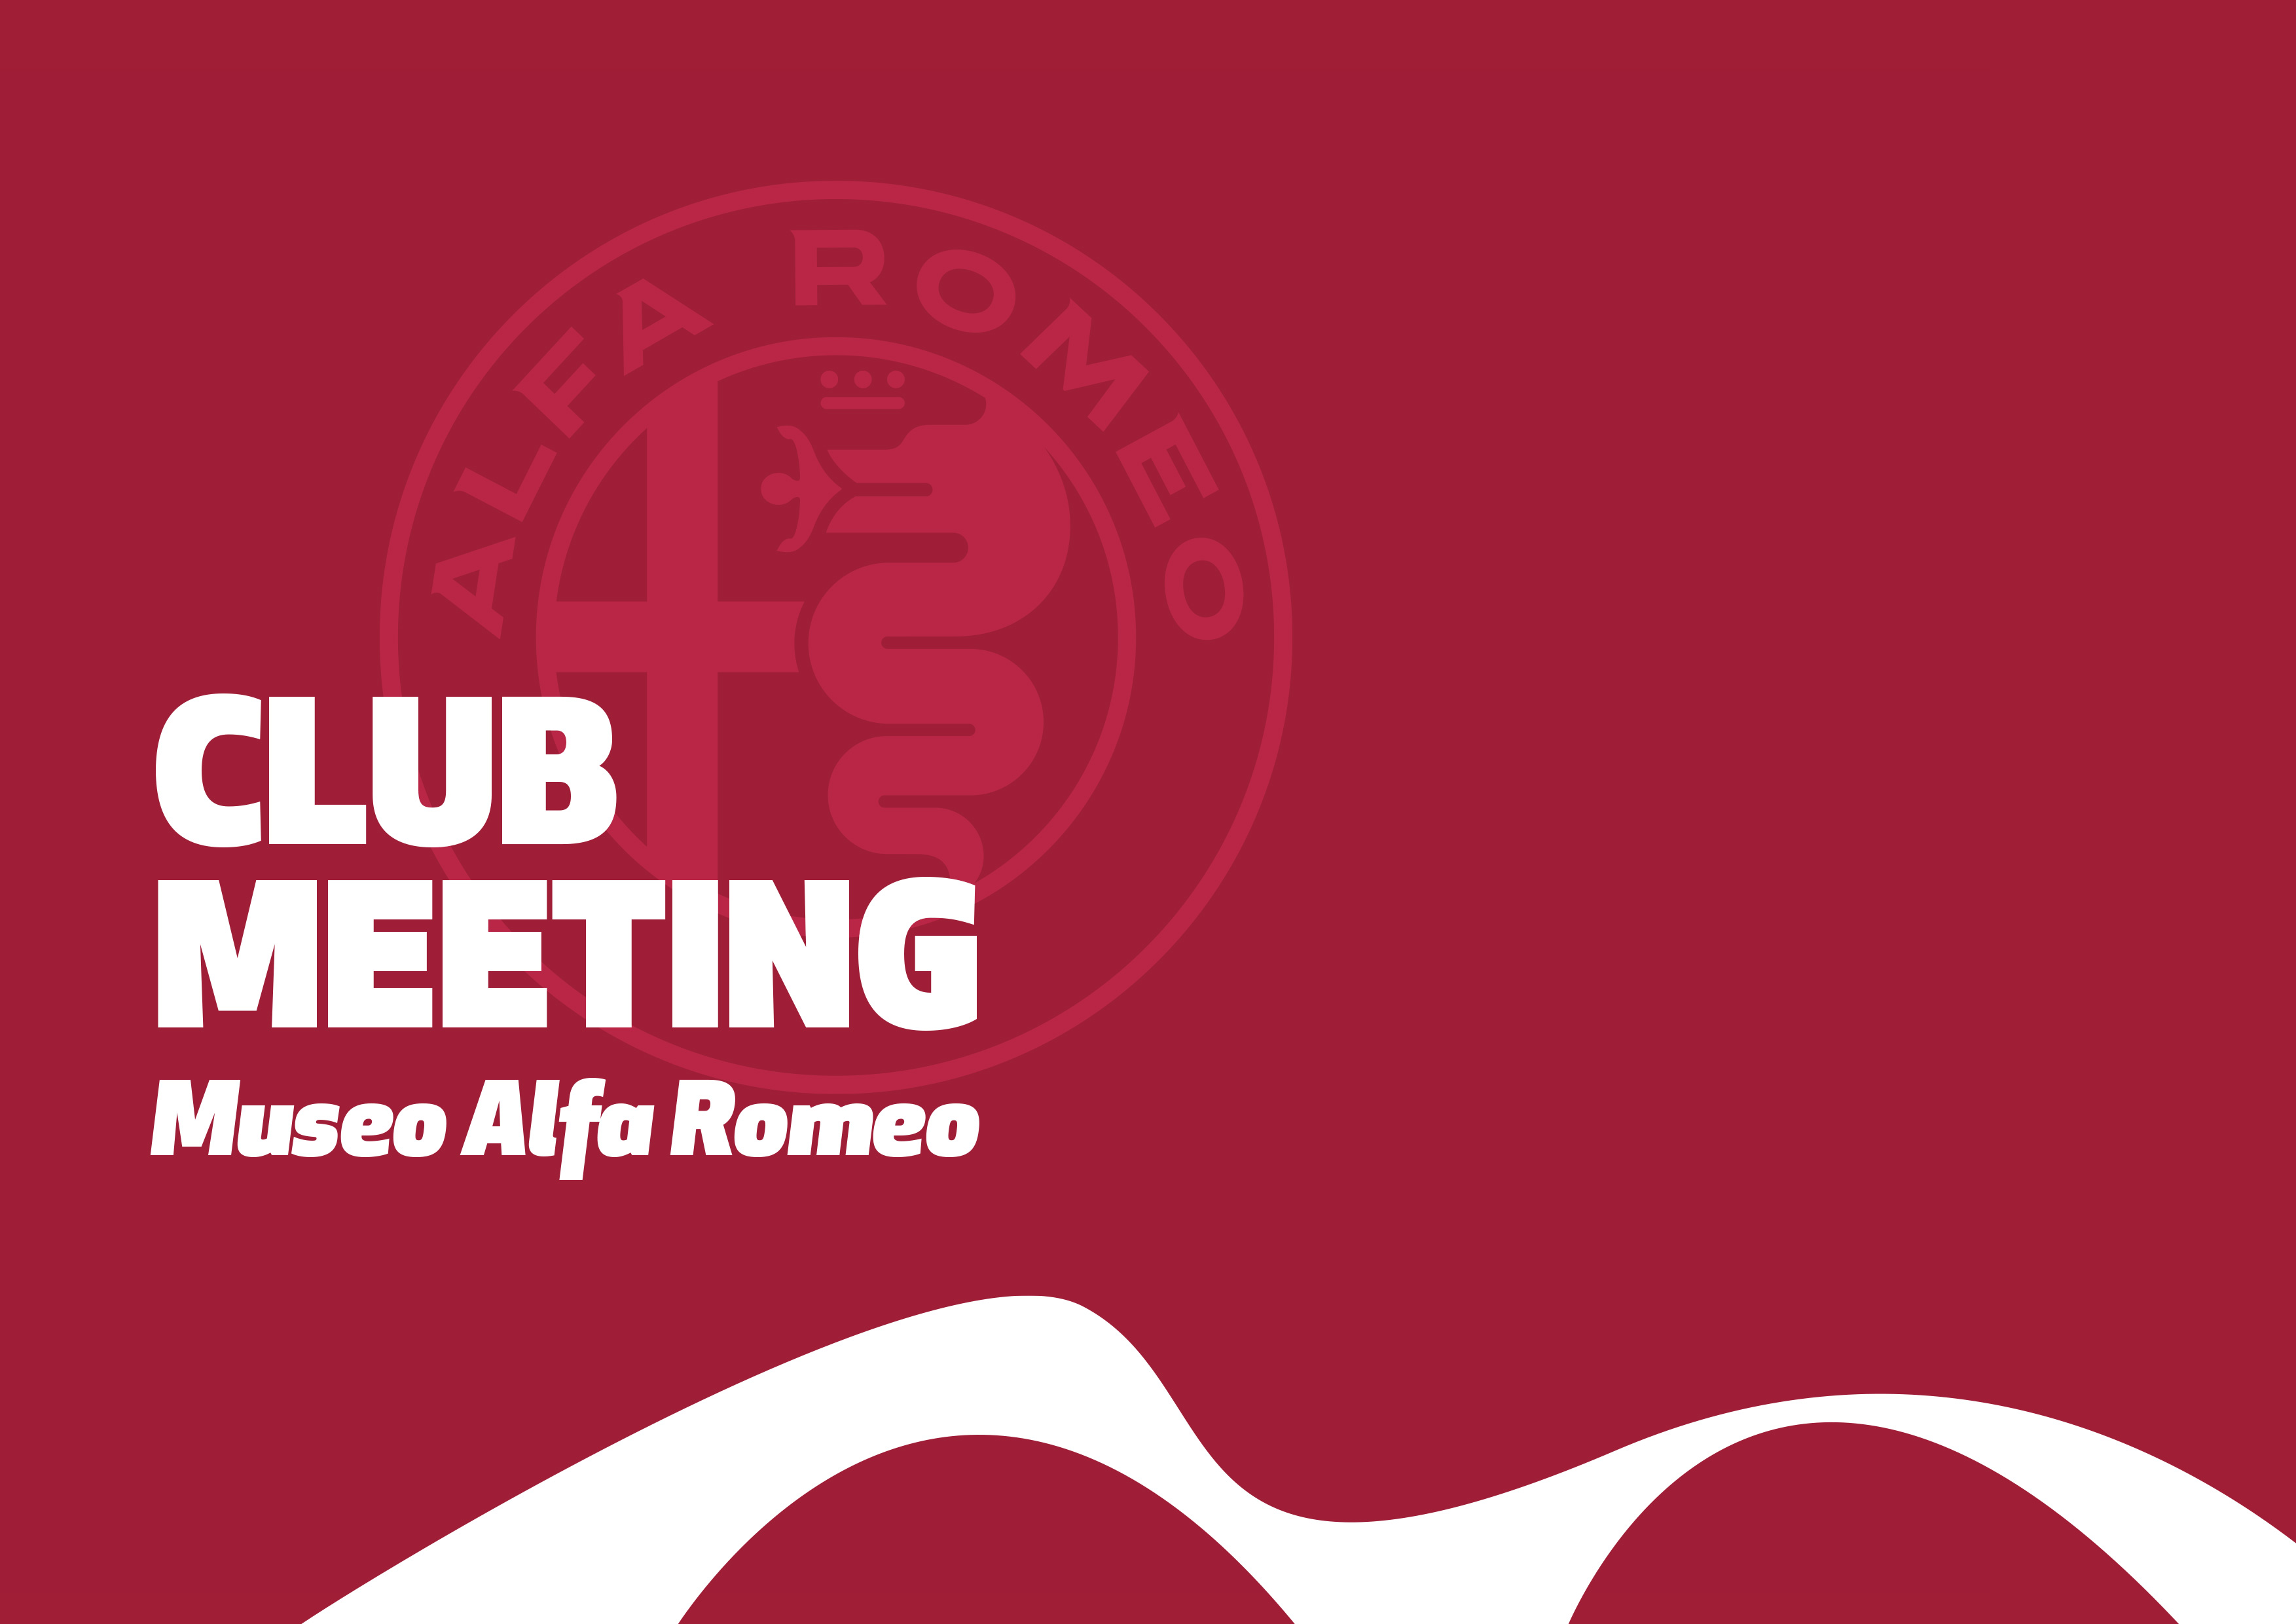 Image of a poster of the Club meeting of the Alfa Romeo Museum